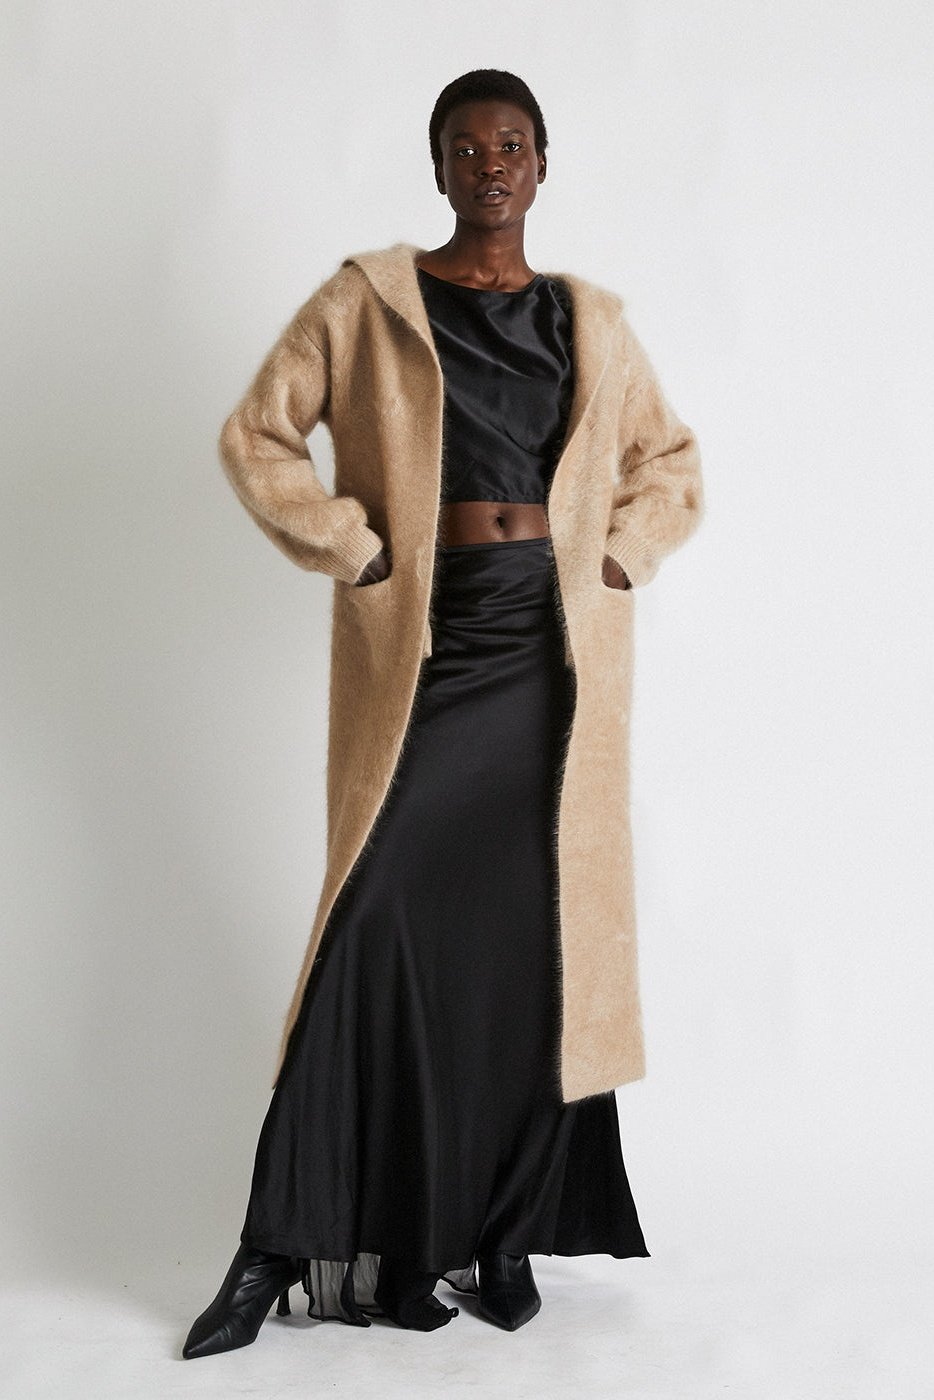 + Beryll Cashmere Coat with Hood | Driftwood - + Beryll Pure Cashmere Coat with Hood | Driftwood - +Beryll Worn By Good People